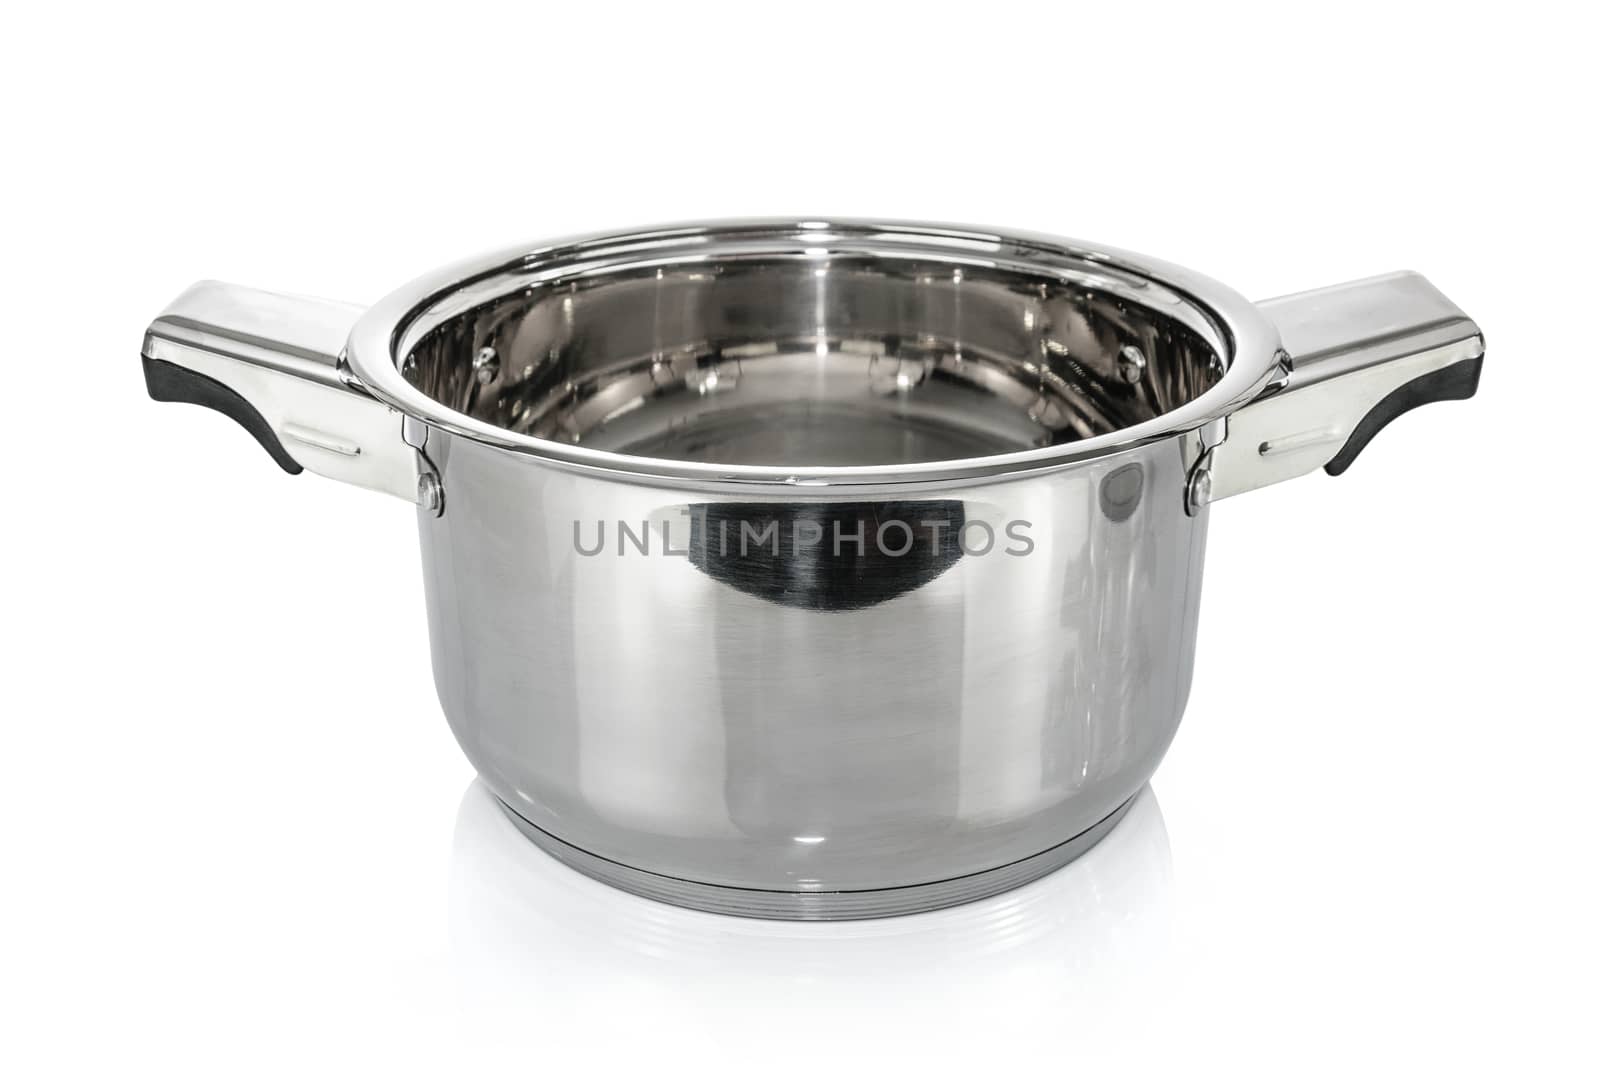 Stainless steel cooking pot by wdnet_studio